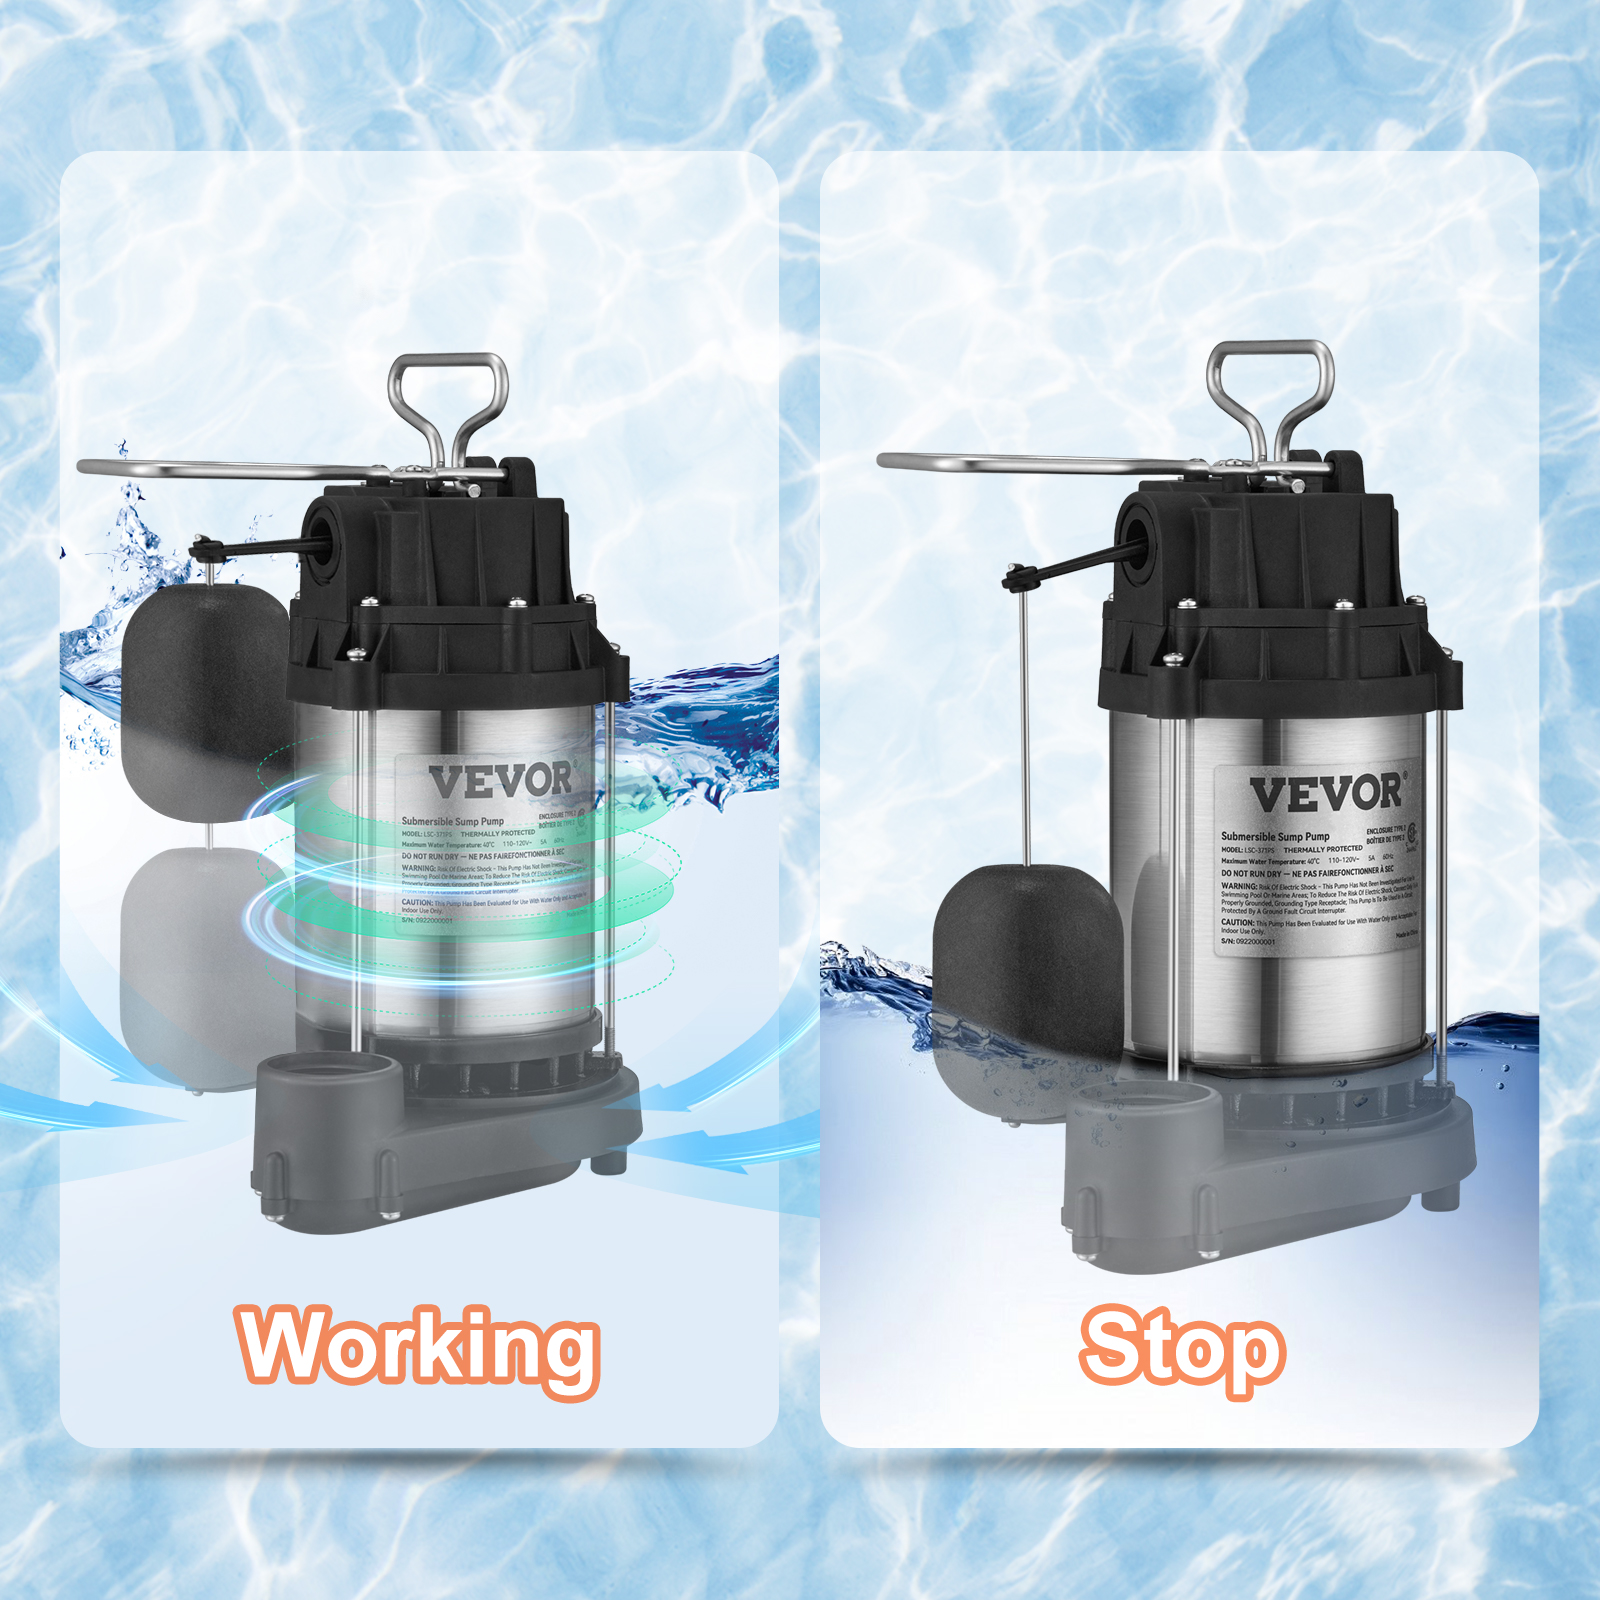 VEVOR Sump Pump, 1.5 HP 6000 GPH, Submersible Cast Iron and Stainless Steel  Water Pump, 1-1/2 Discharge With 1-1/4 Adaptor, Automatic Vertical Float  Switch, for Indoor Basement Water Basin 